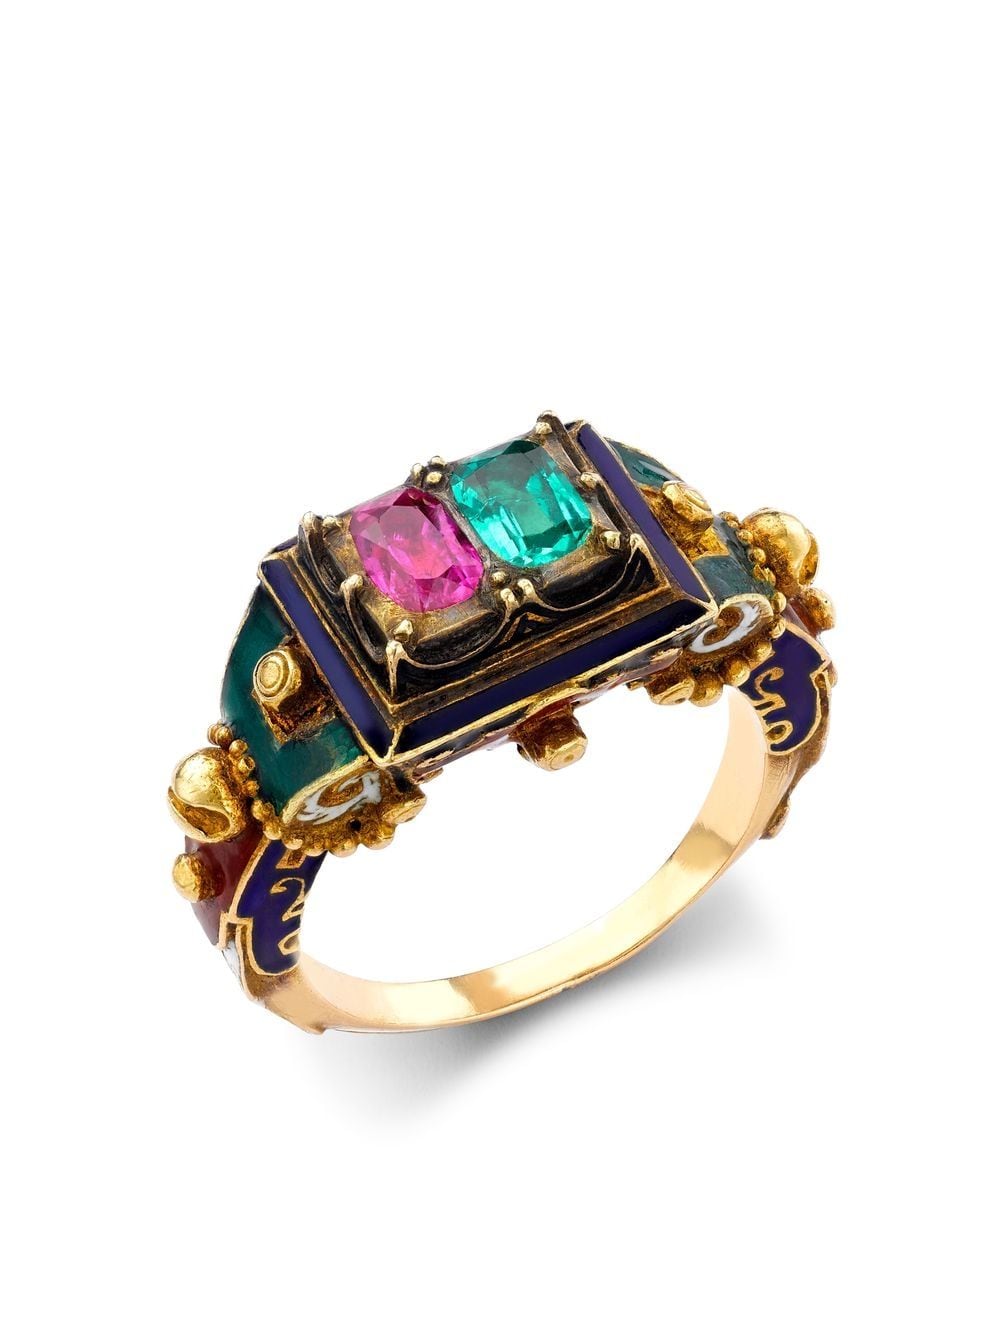 Pre-owned Pragnell Vintage 1837-1890 18kt Yellow Gold Ruby And Emerald Ring In Green